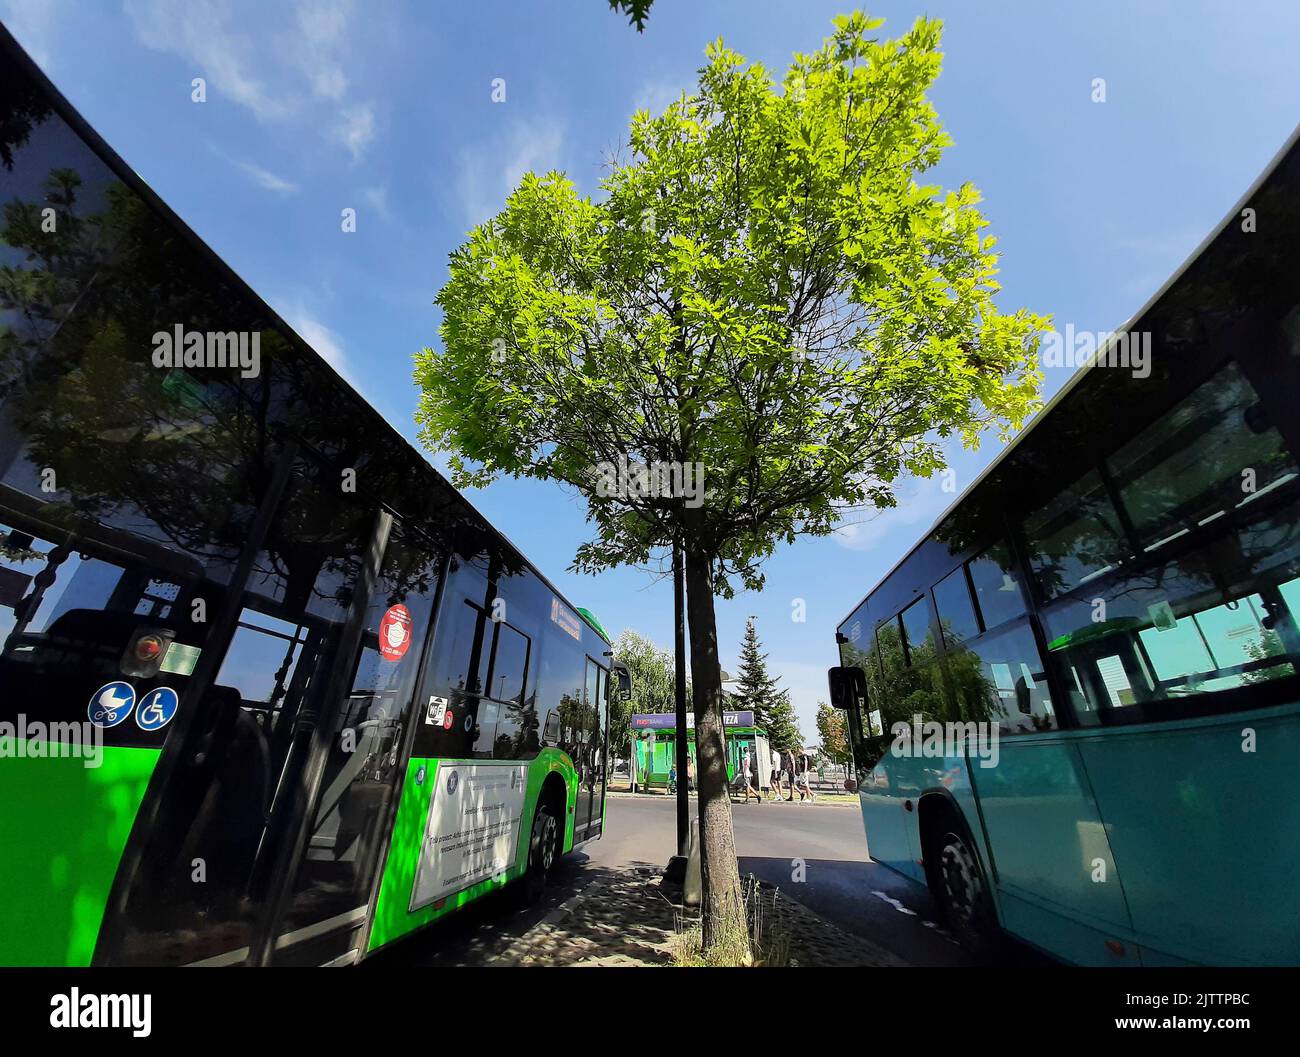 Bucharest, Romania - August 29, 2022: A green tree between two public transport buses. This image is for editorial use only. Stock Photo